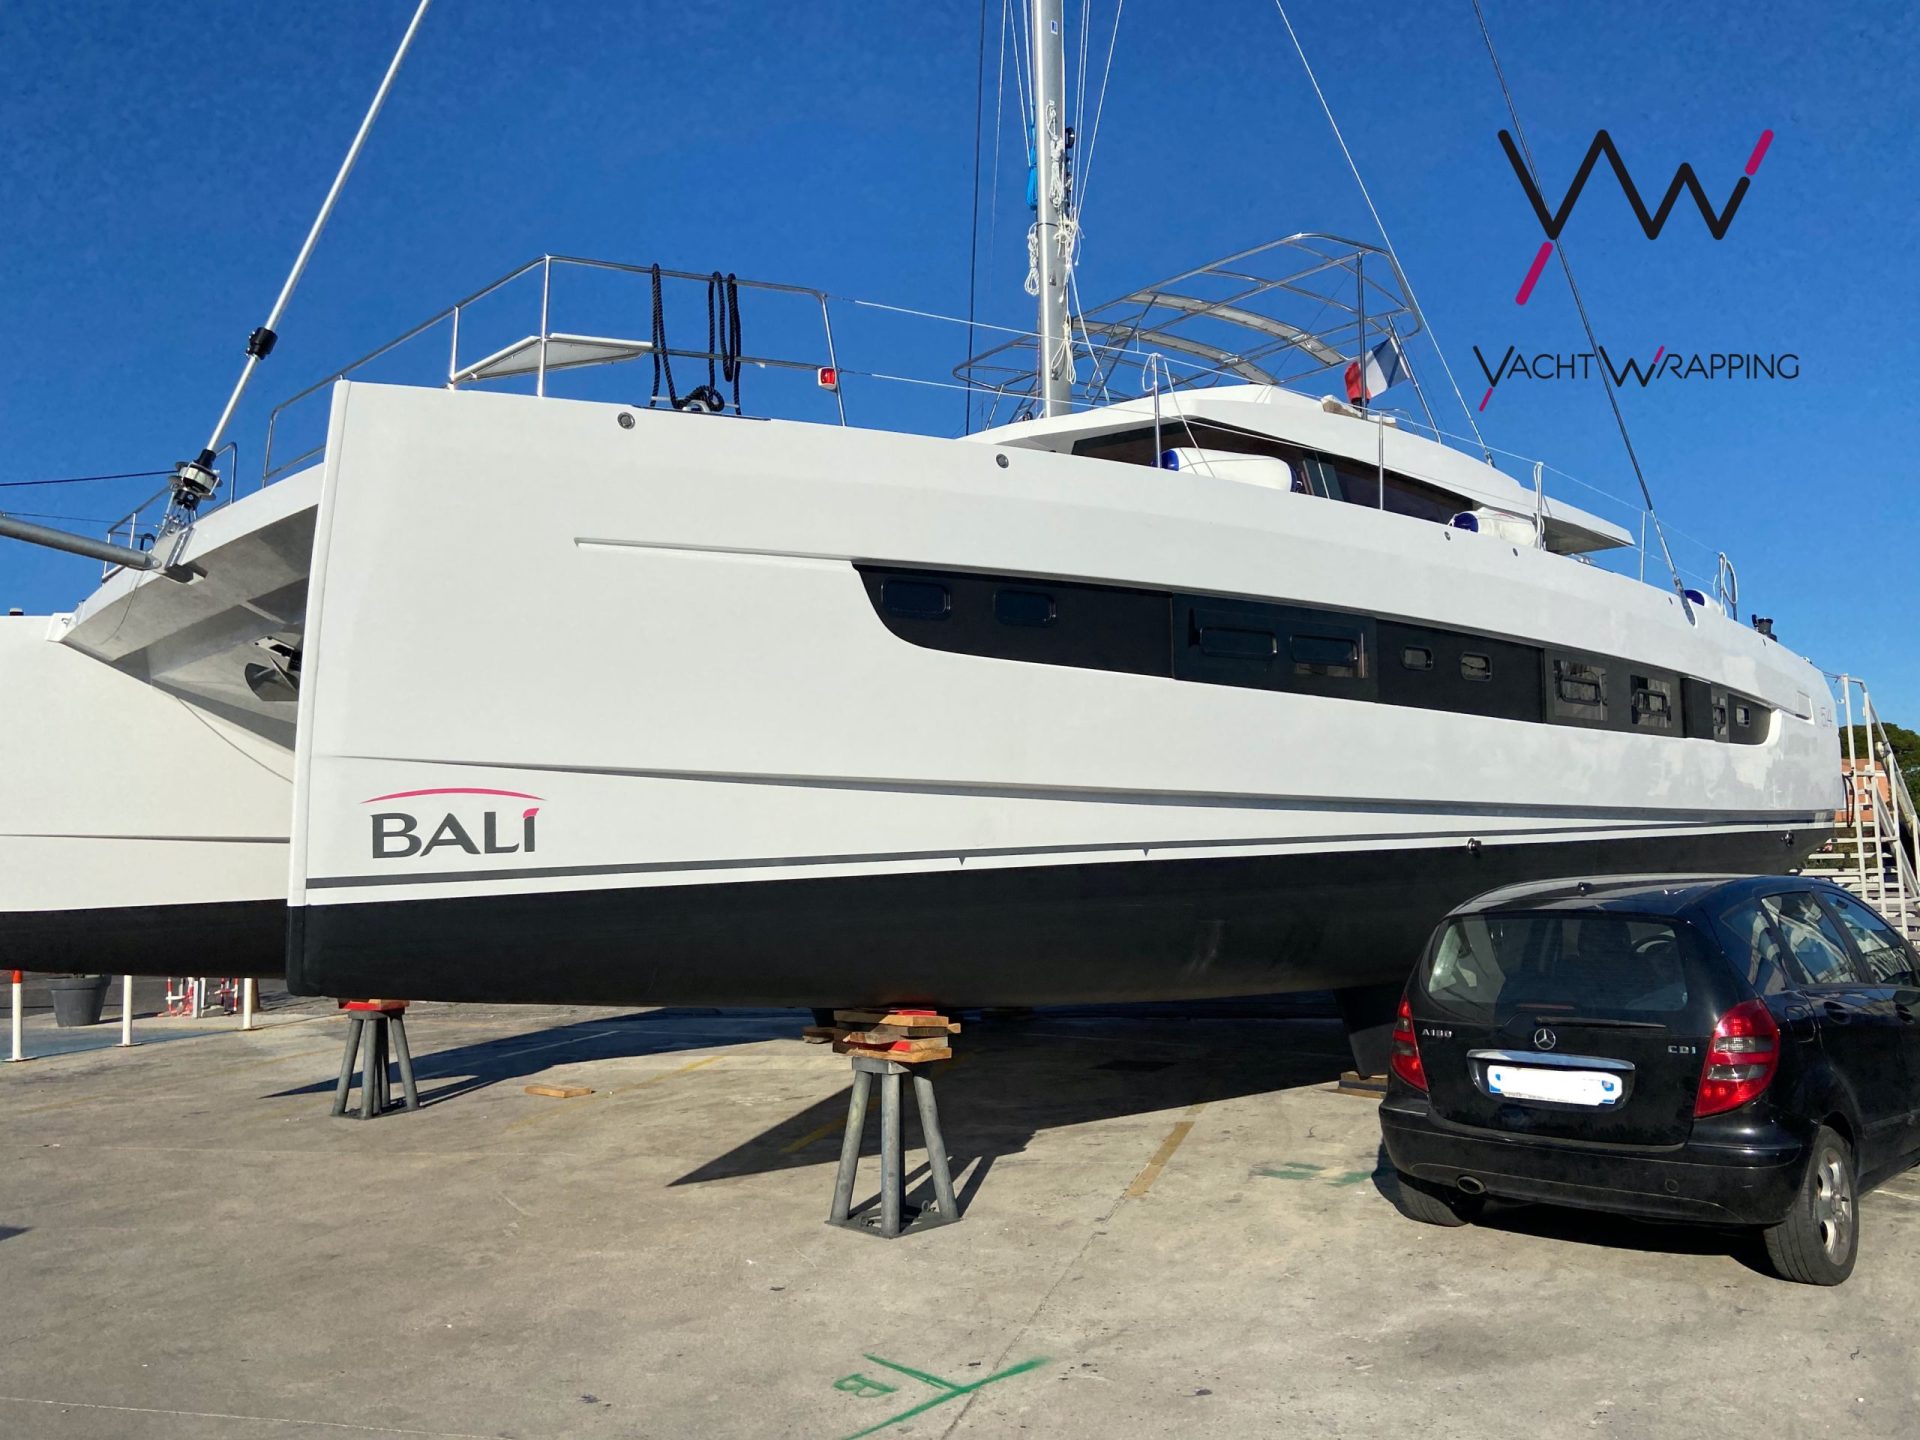 Bali 5.4 - Total covering - Yacht Wrapping